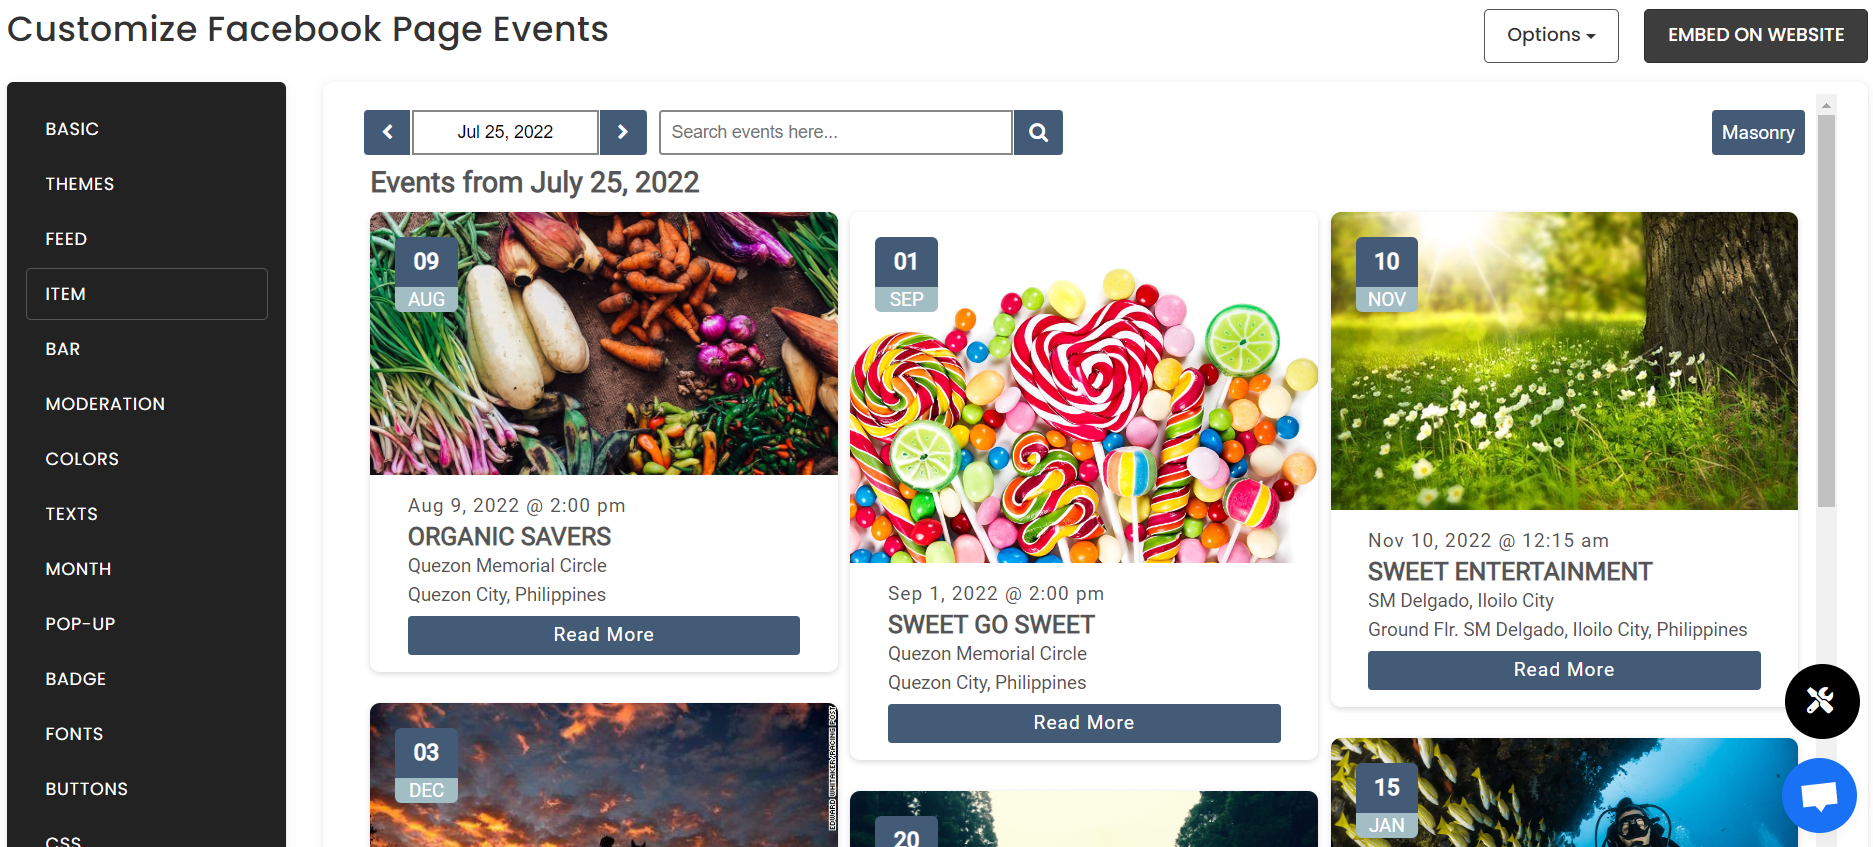 Customize your feed - How To Embed Facebook Page Events On Squarespace Website For Free?